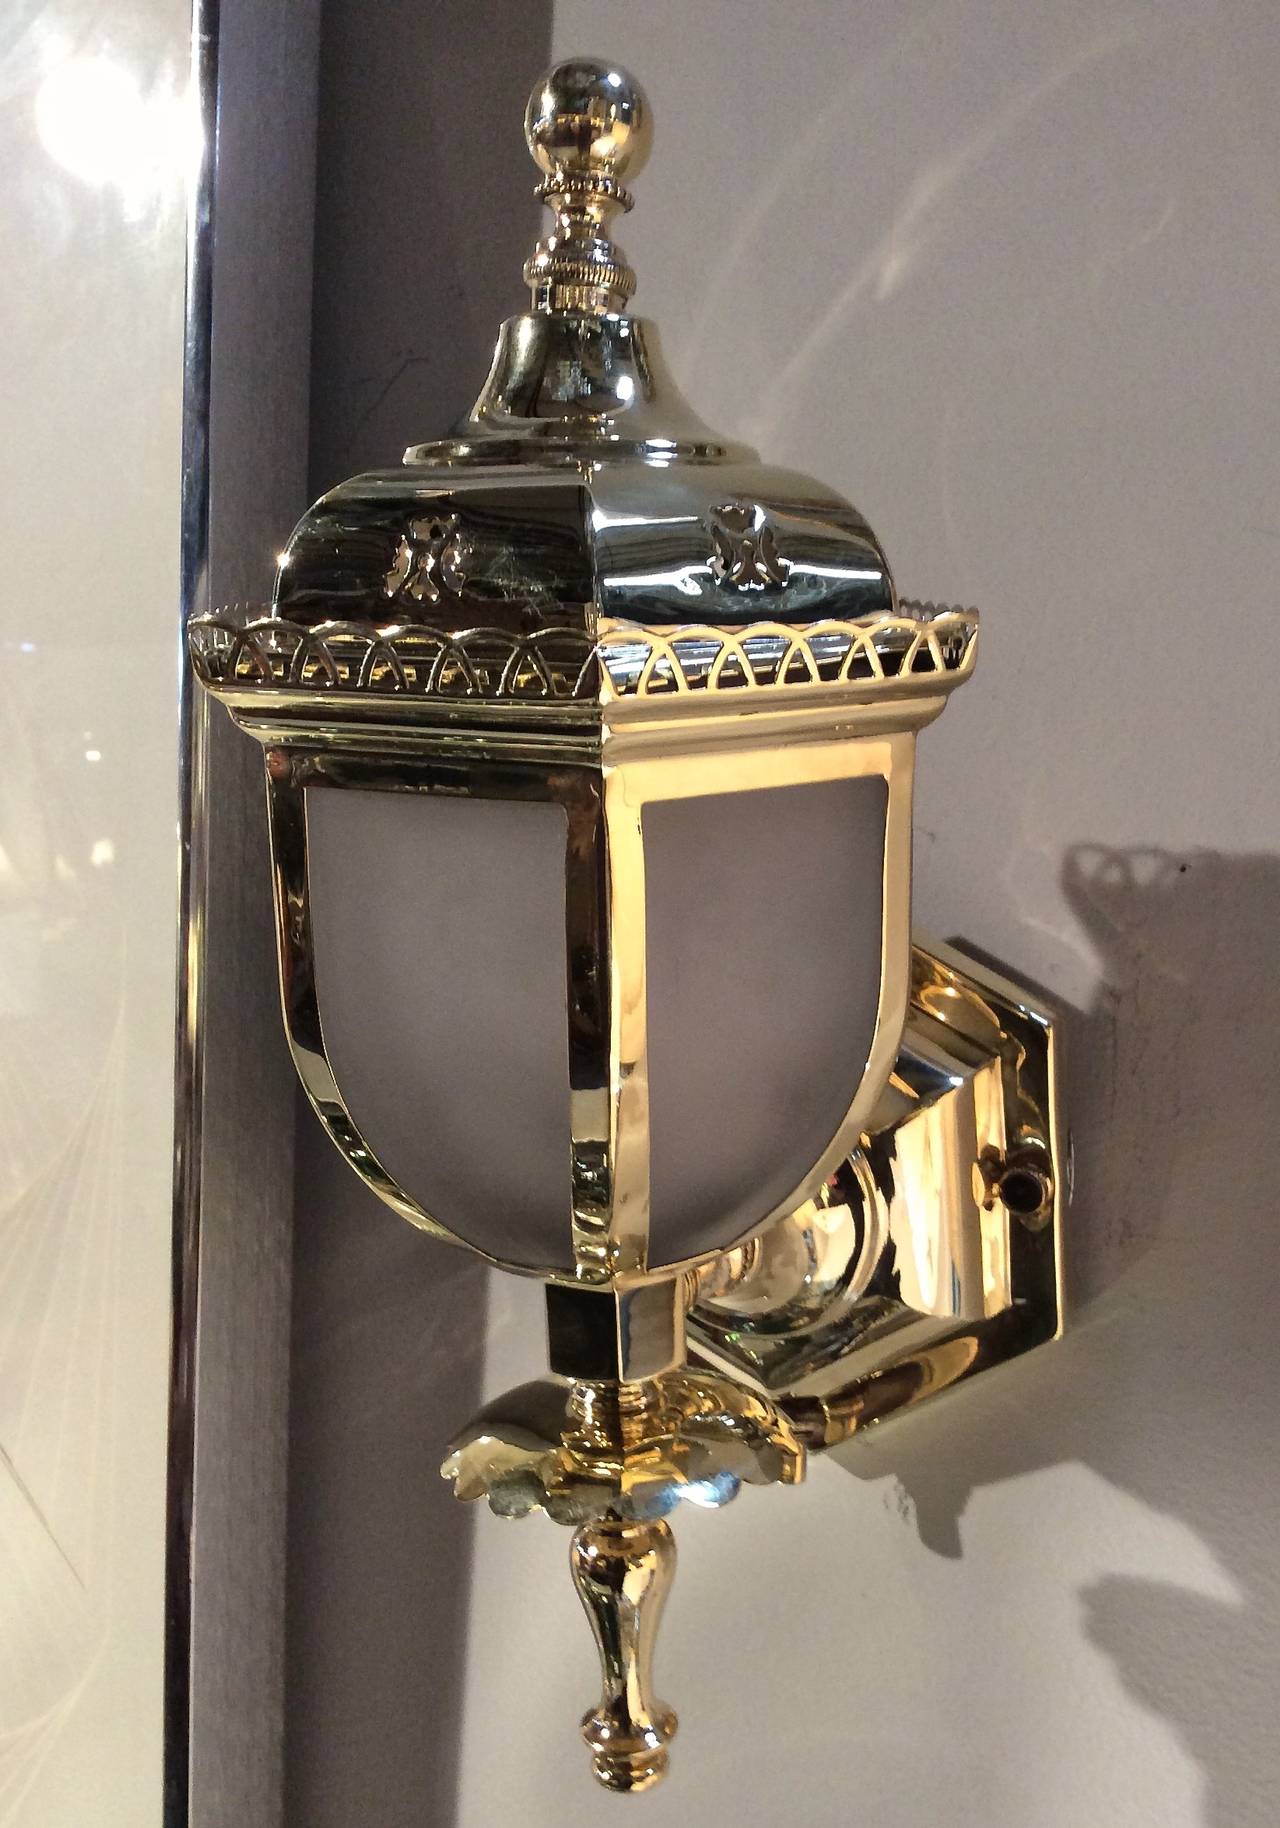 Amazing set of four antique solid unlacquered brass lantern style sconces, with six panelled solid cast glass shades. Intricate metal detail and frosted solid cast glass shade is an amazing 1/4 thick. Top has detailed pagoda like brass covers.